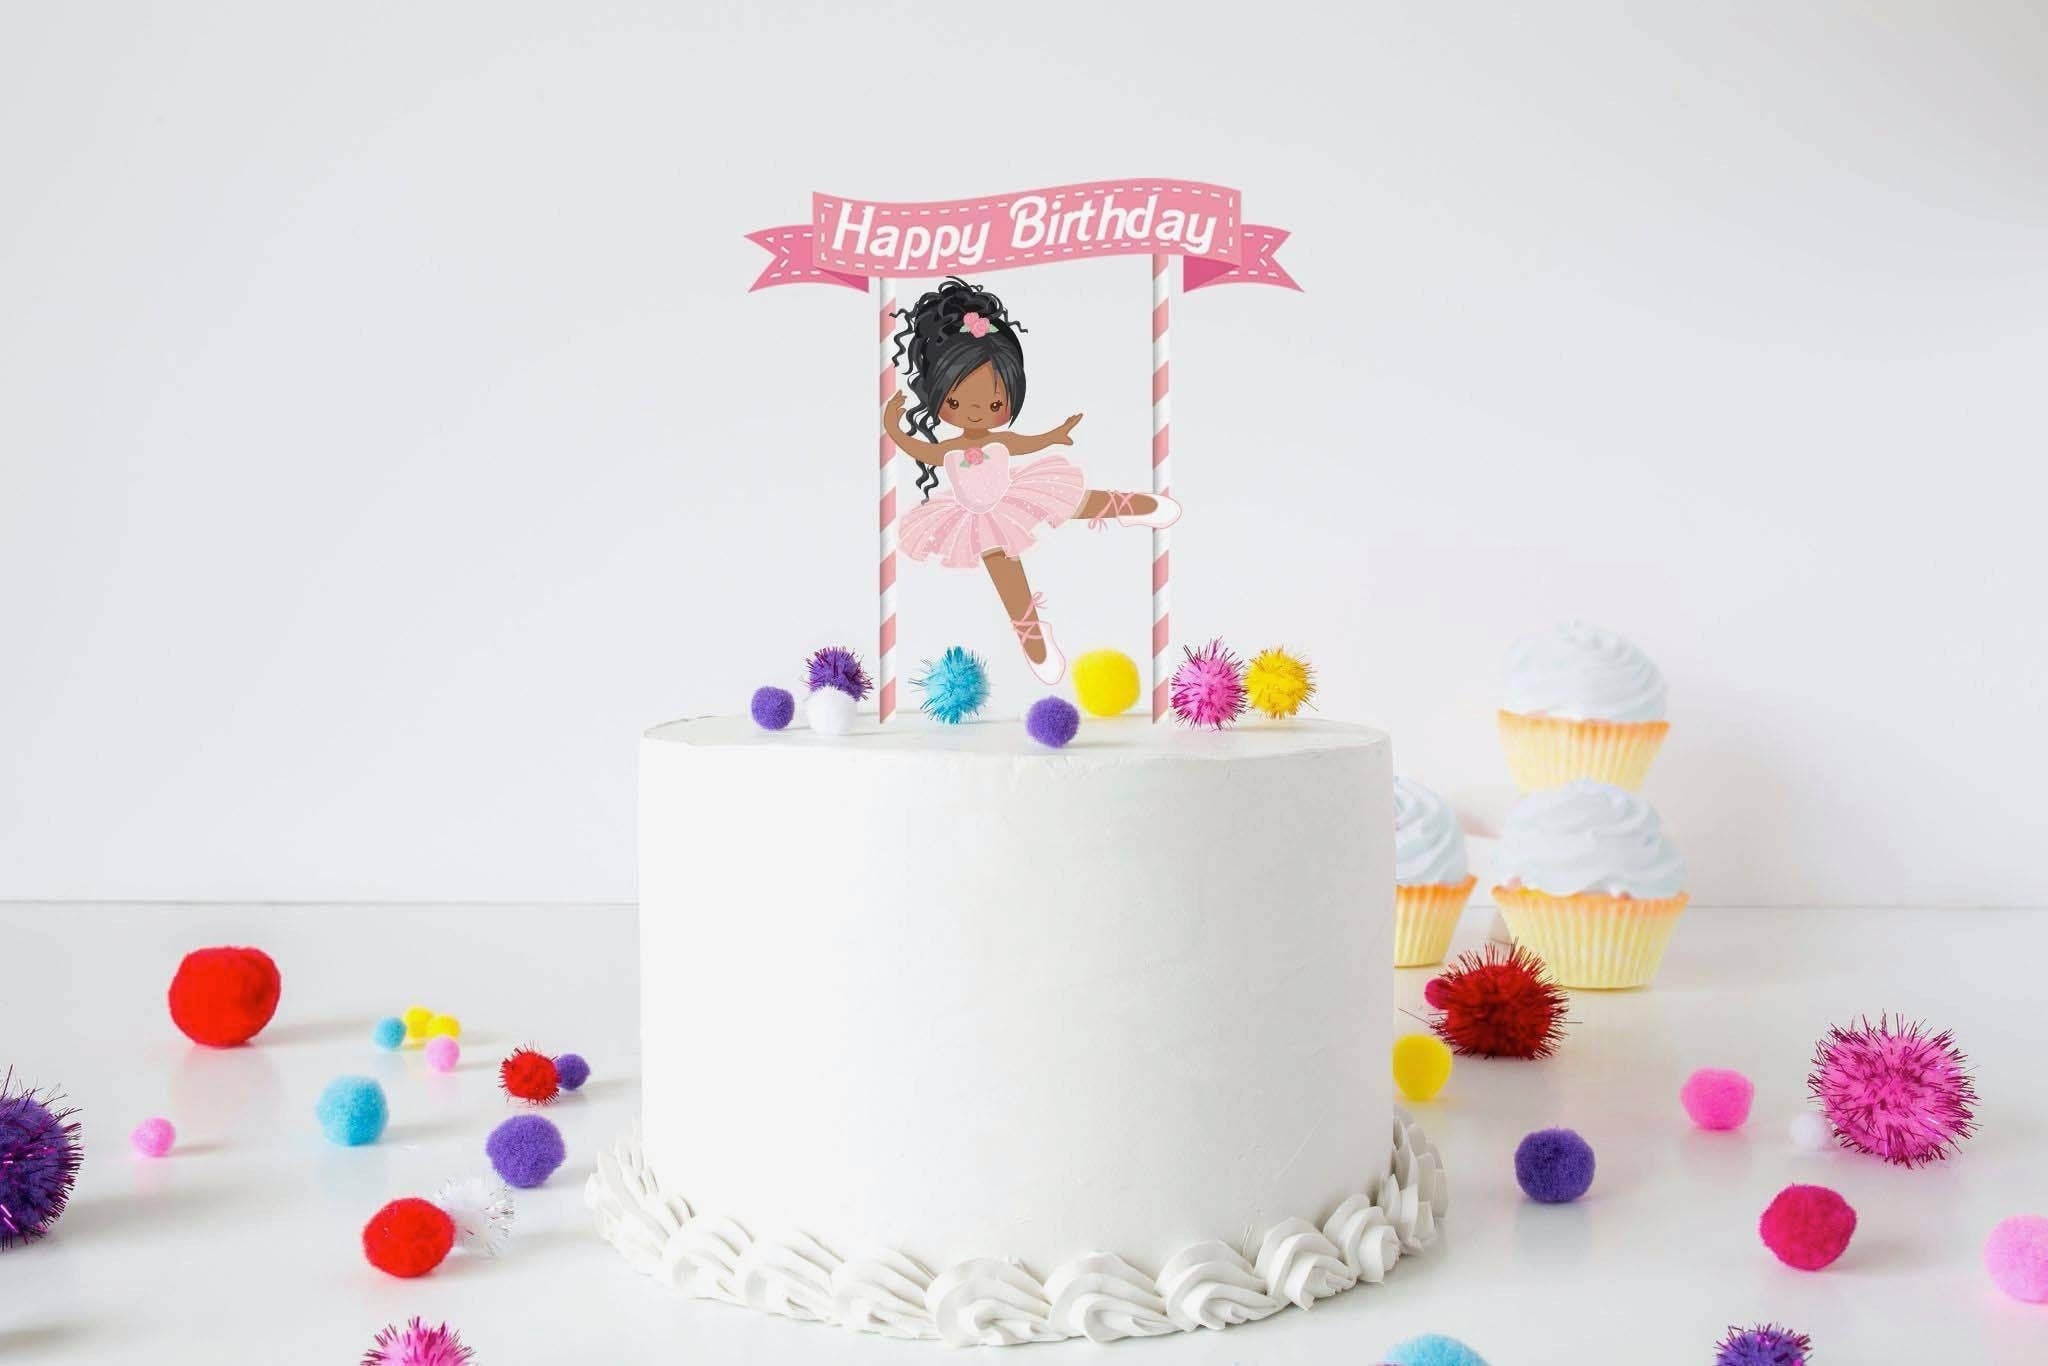 Adorable Afro Ballerina Cake Topper – Perfect Pirouette for a Birthday Celebration